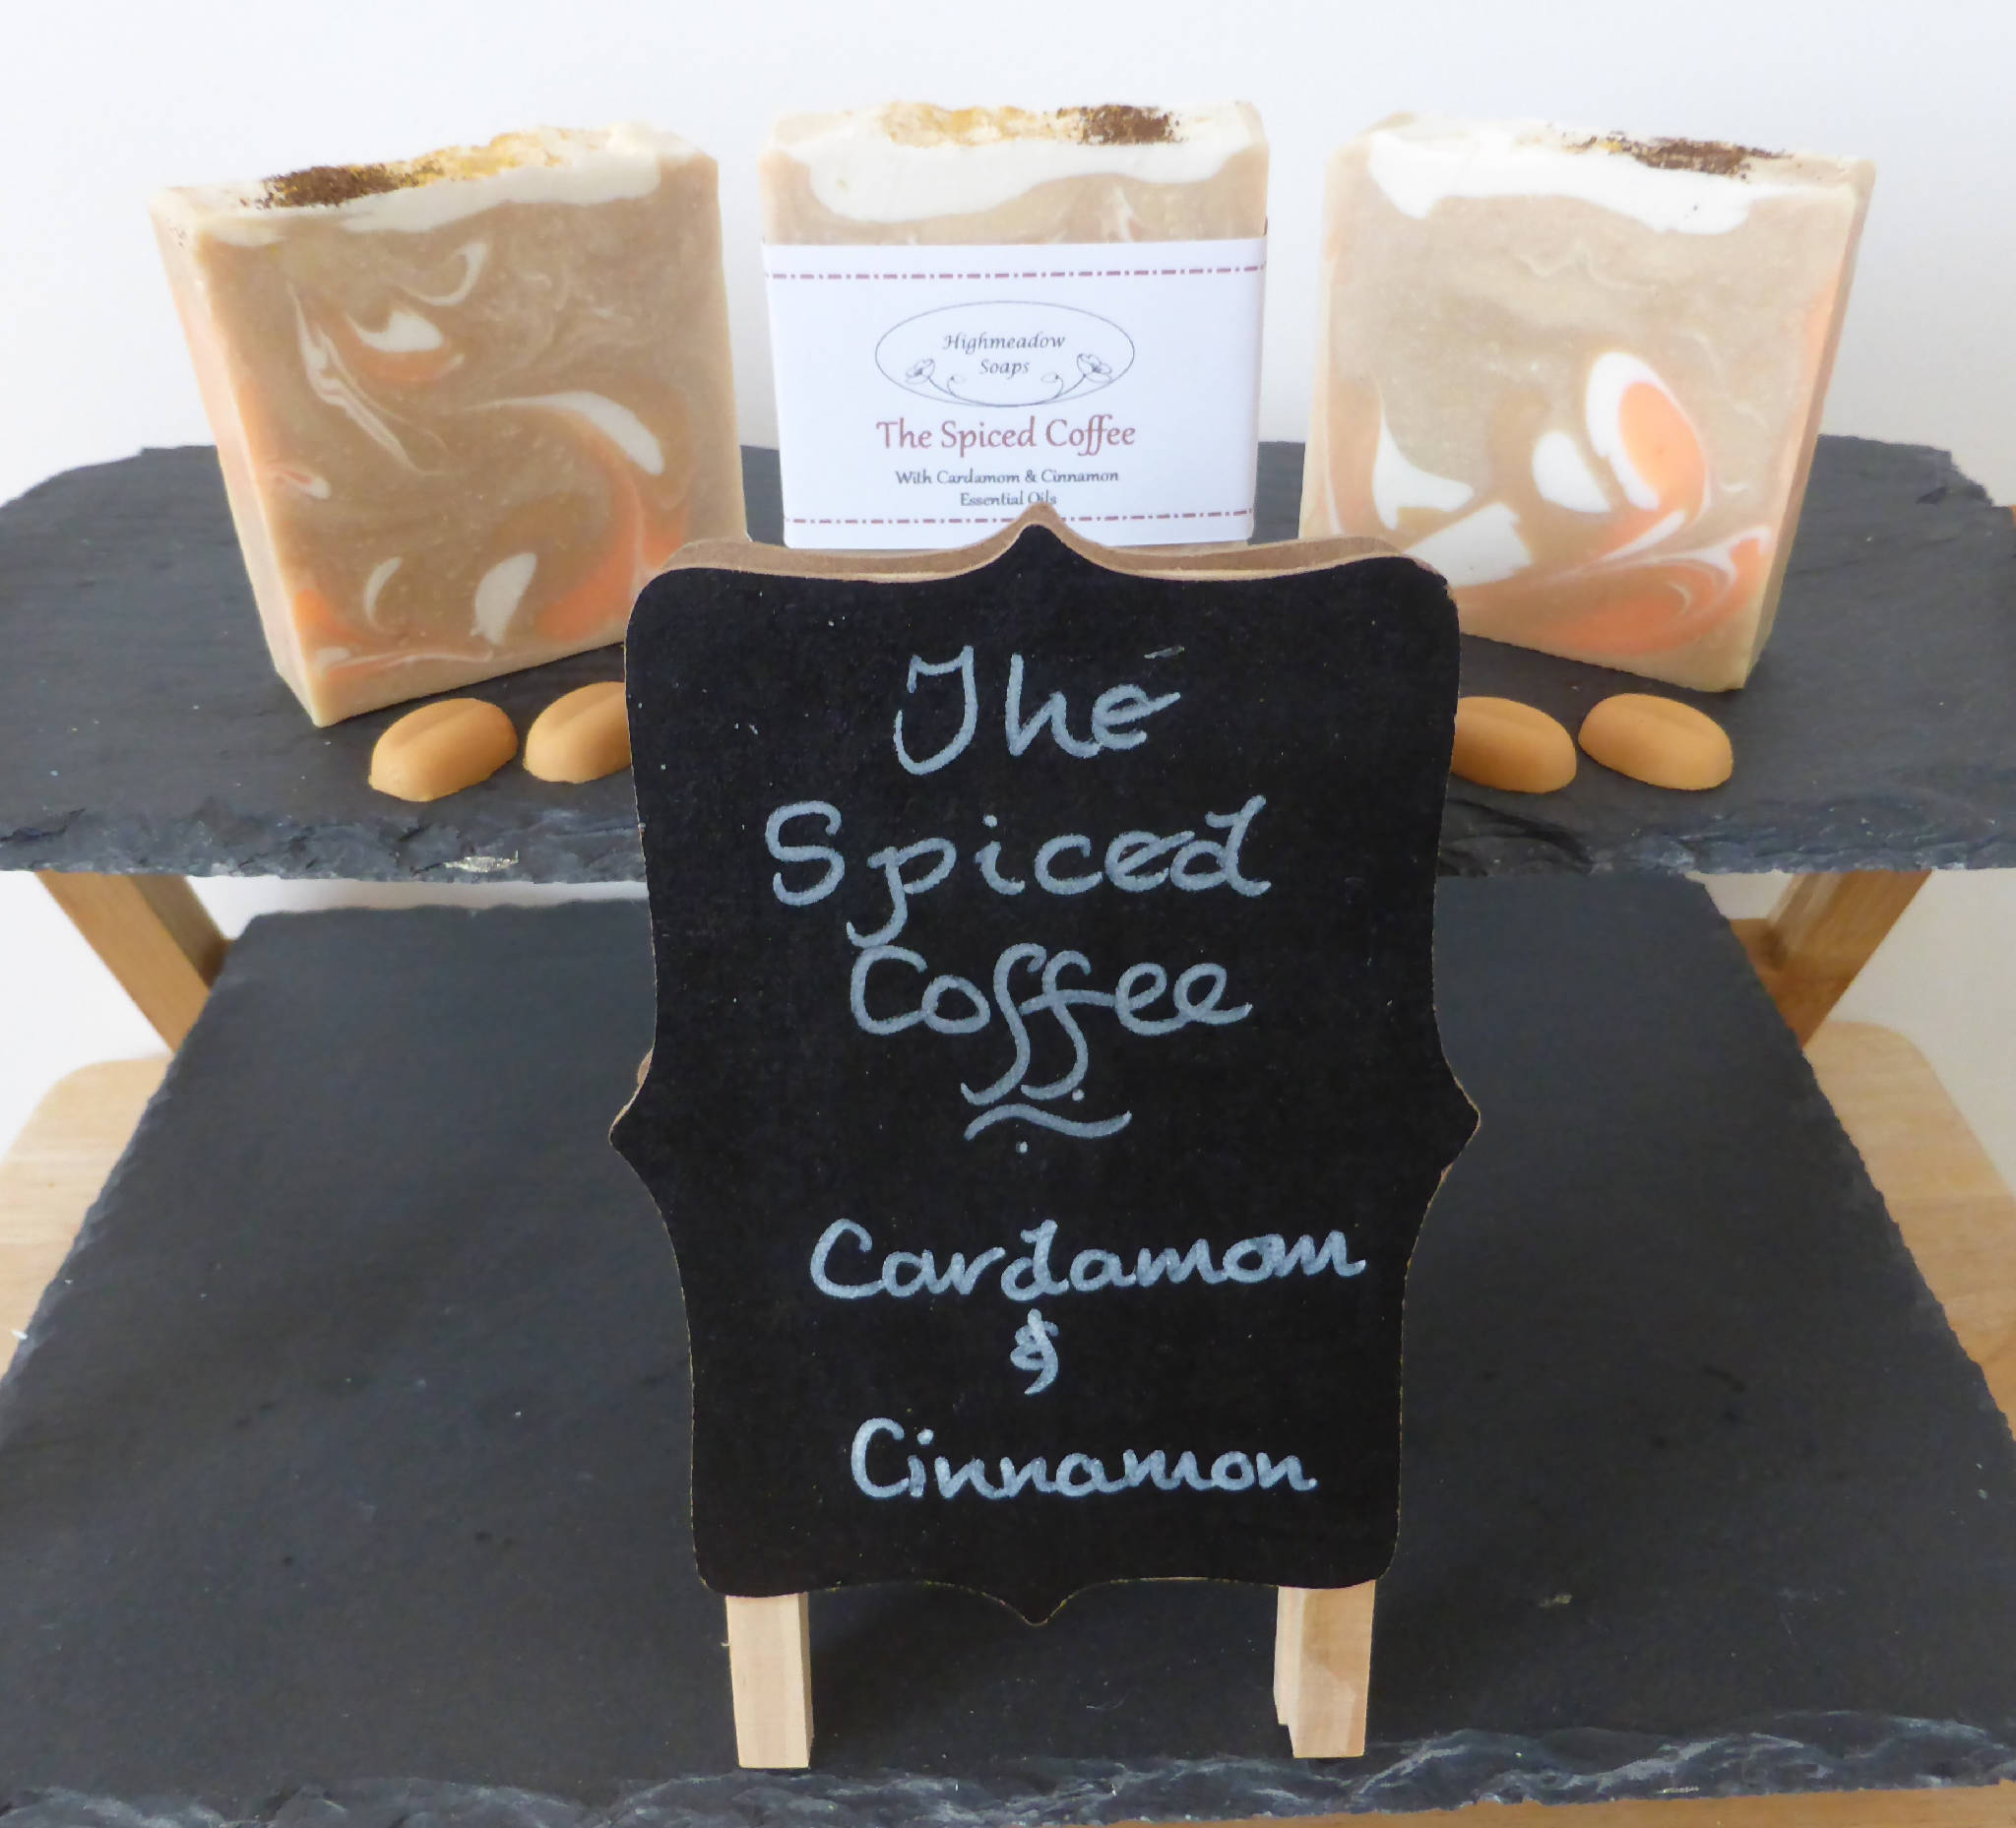 Spiced Coffee soap